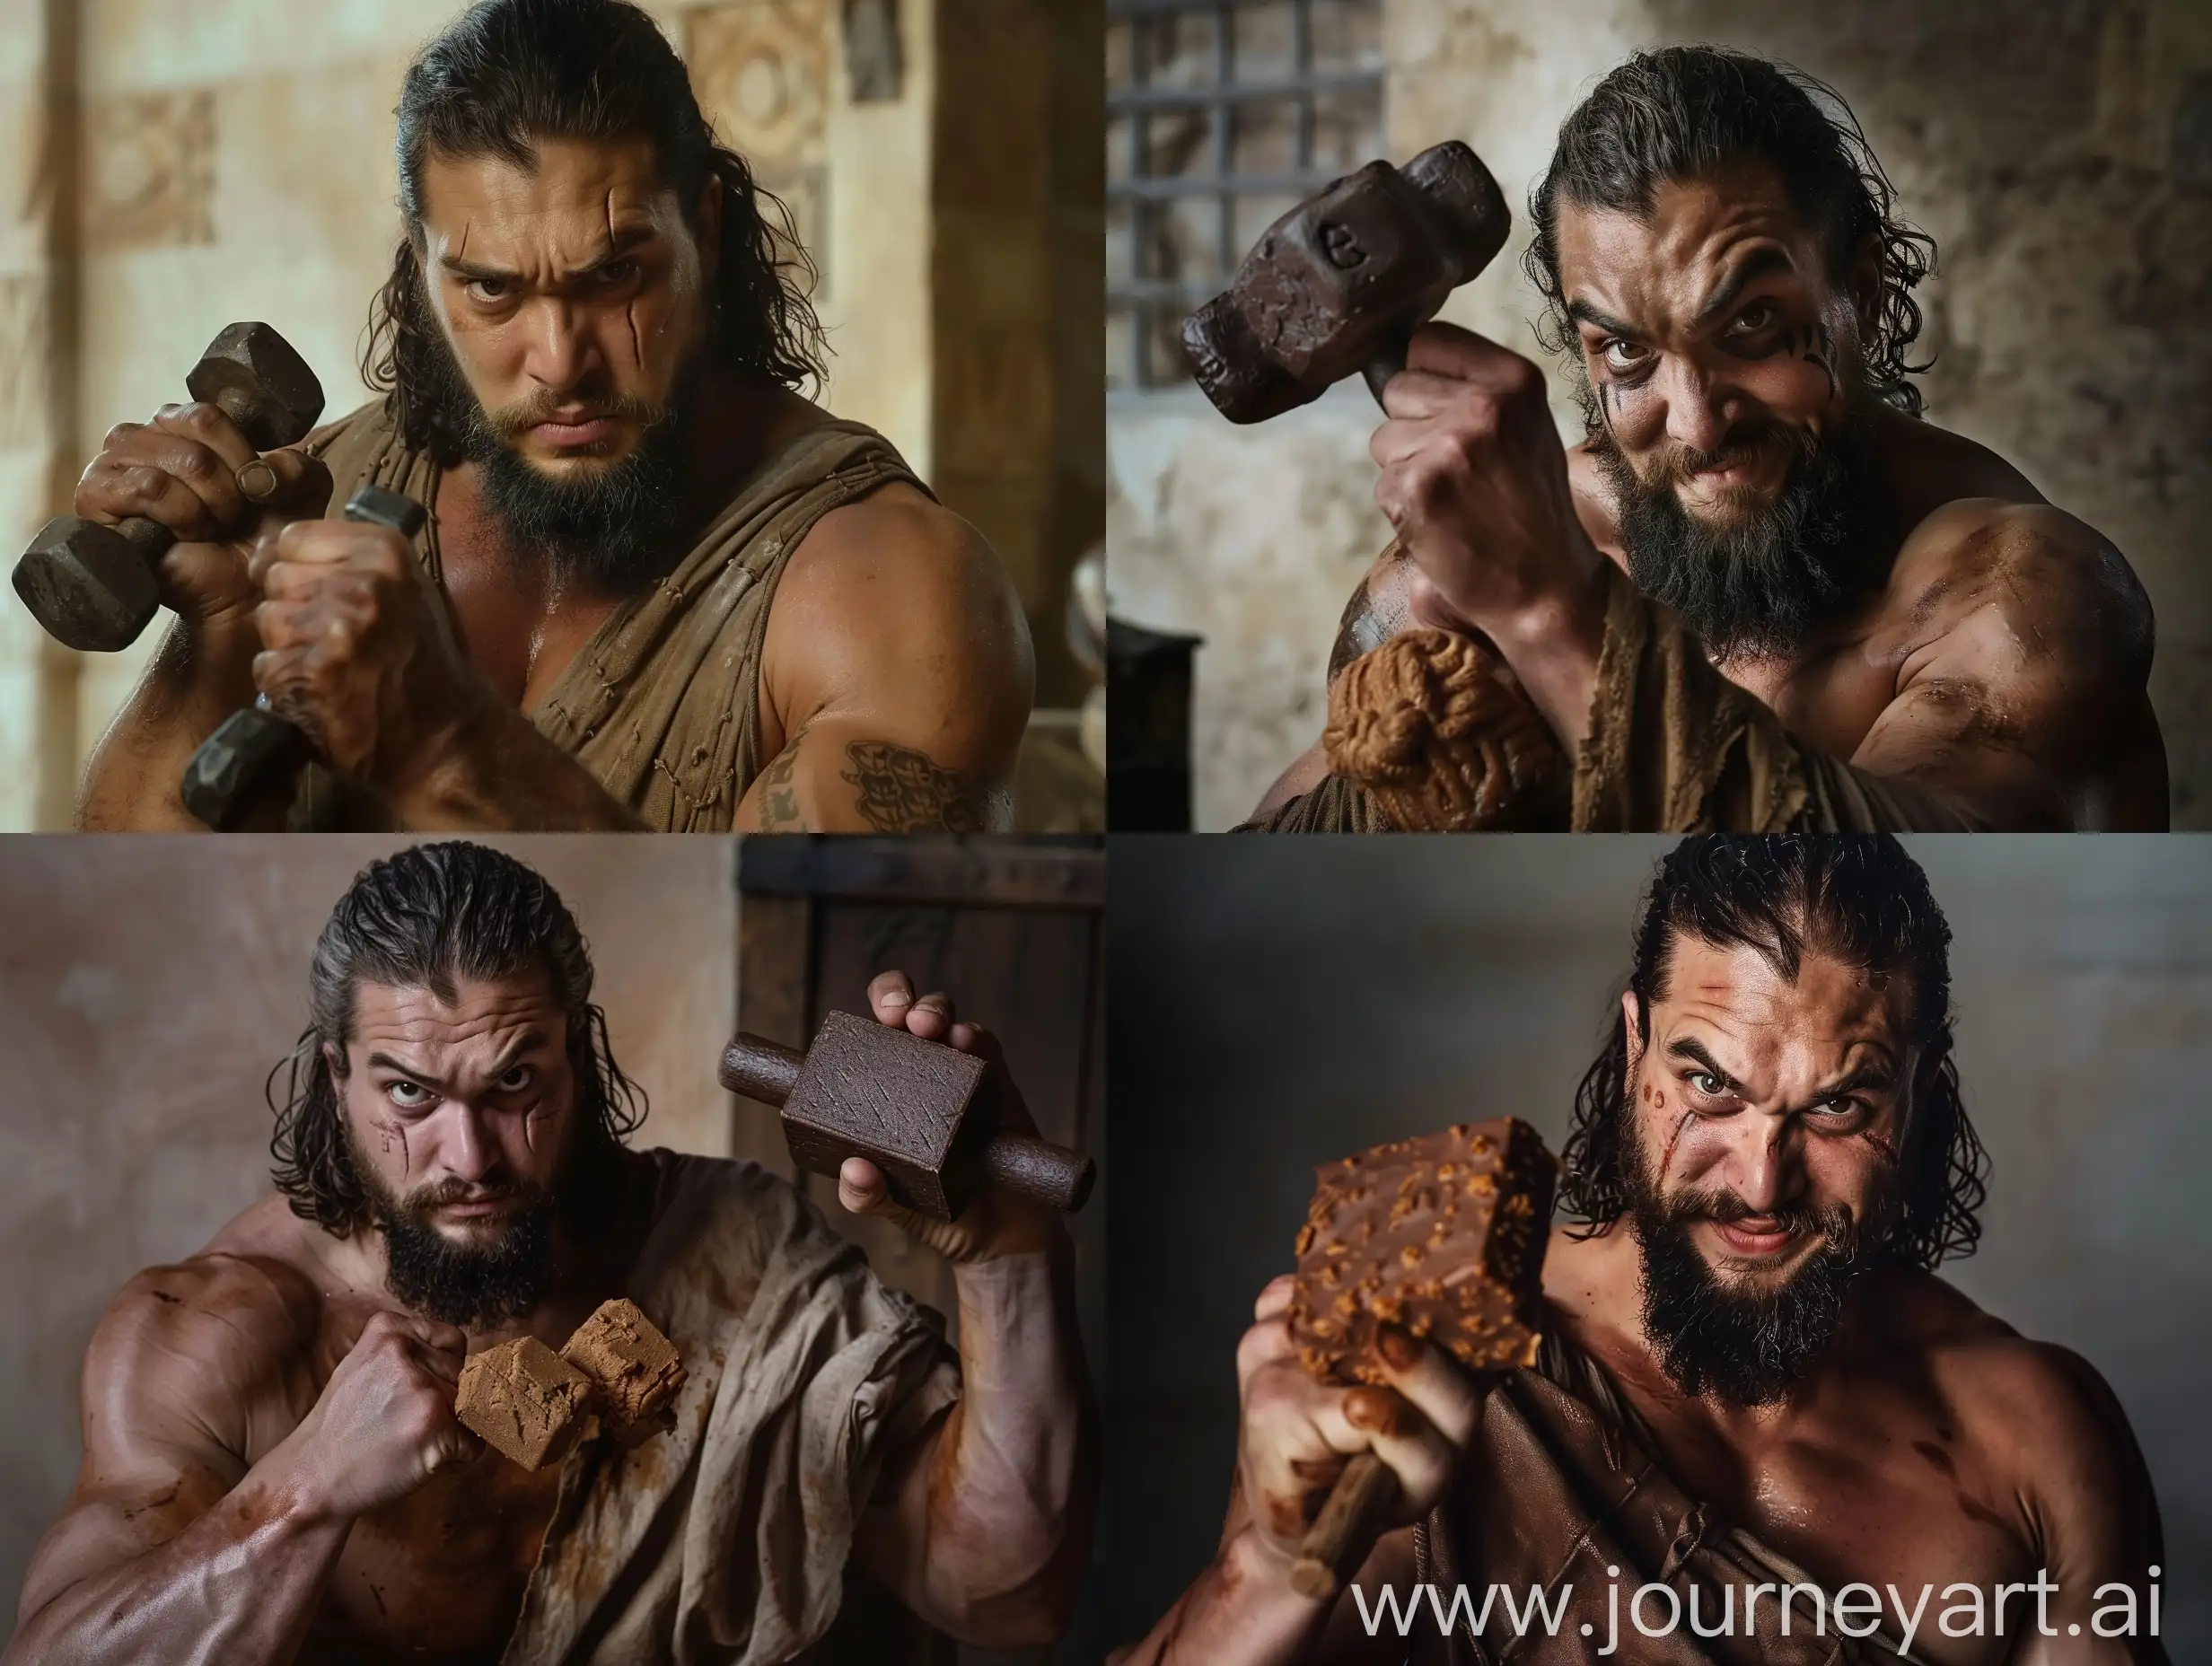 Khal Drogo is in Game of Thrones, Khal Drogo is with Jason Momoa in Game of Thrones, Khal Drogo is very fat, Khal Drogo's face and body is very very fat, Khal Drogo is wearing an old brown tunic Khal Drogo in The Winterfell Club plays sports. Khal Drogo is holding a dumbbell in one hand and a bar of chocolate in the other, Khal Drogo is looking at the camera with a mischievous smile, the style of The Witcher is classic lighting, realistic, Claire, q2